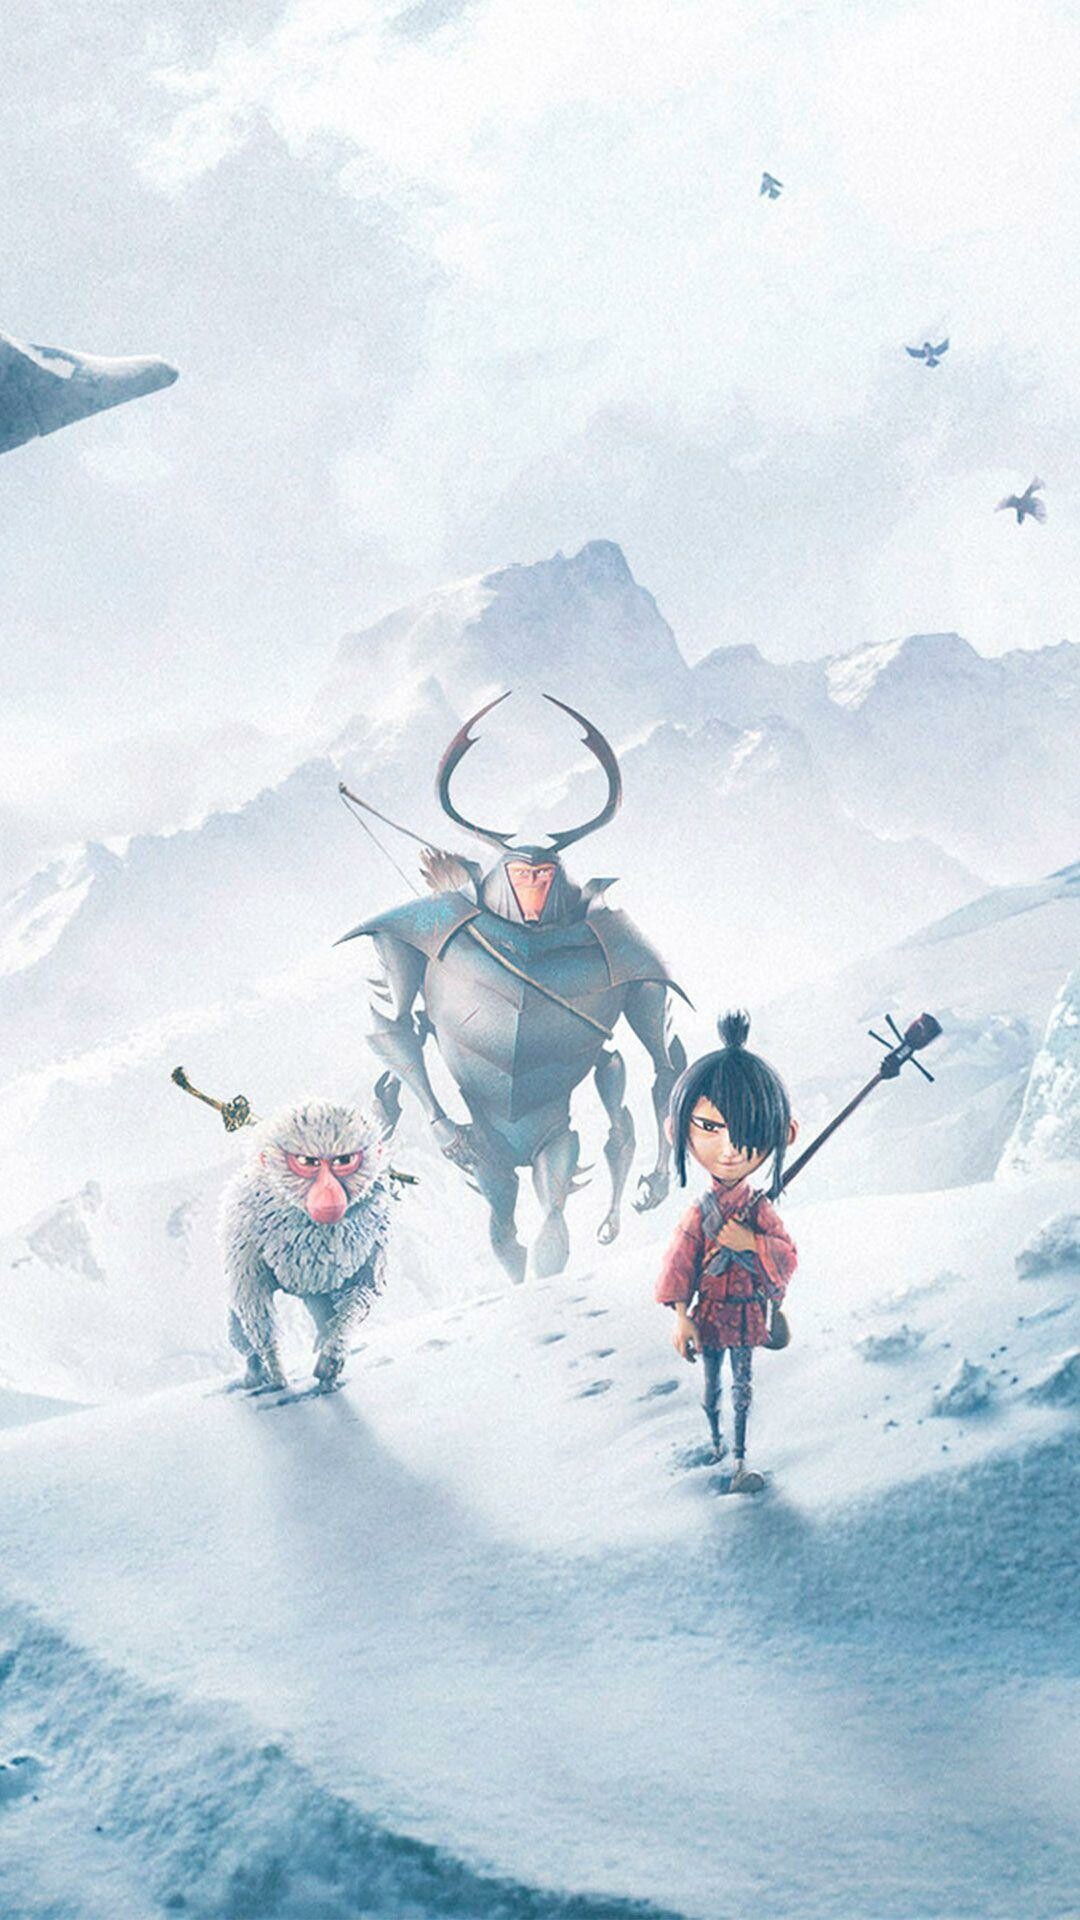 HD wallpaper, Phone Full Hd Kubo And The Two Strings Wallpaper Photo, Animation, 1080X1920 Full Hd Phone, Kubo, Two Strings, Wallpaper